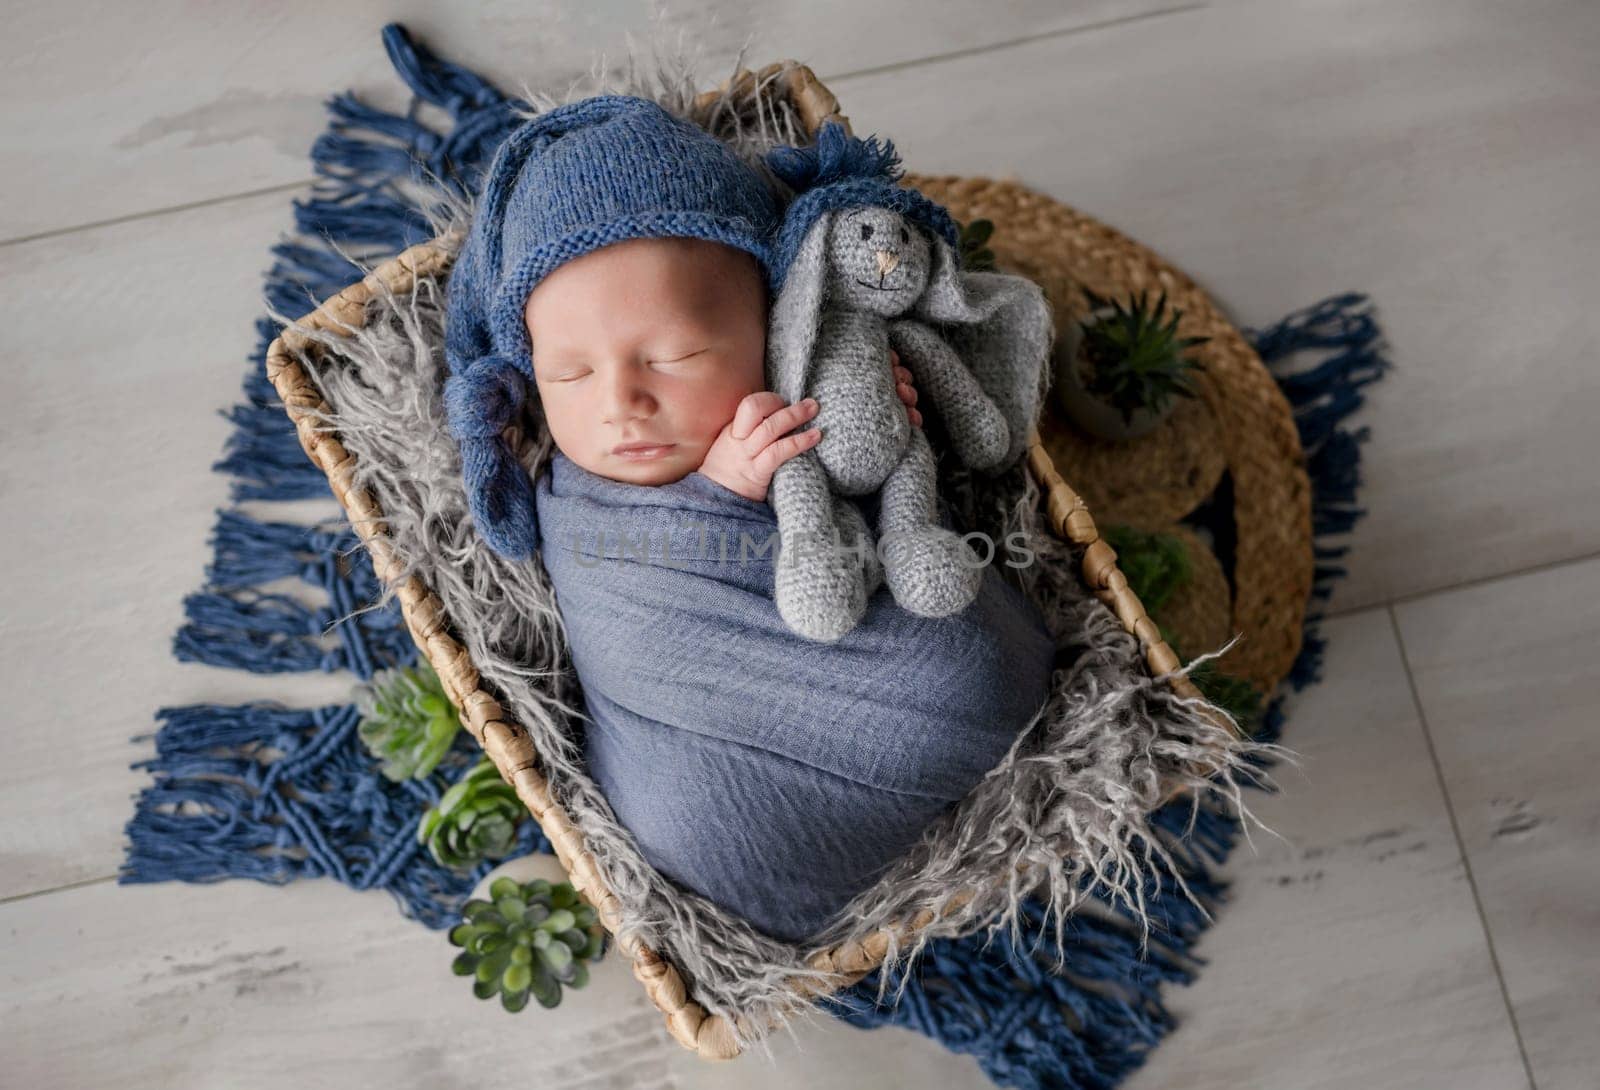 Adorable newborn baby boy swaddled in blanket holding knitted bunny toy and sleeping in basket studio portrait. Cute infant child kid napping